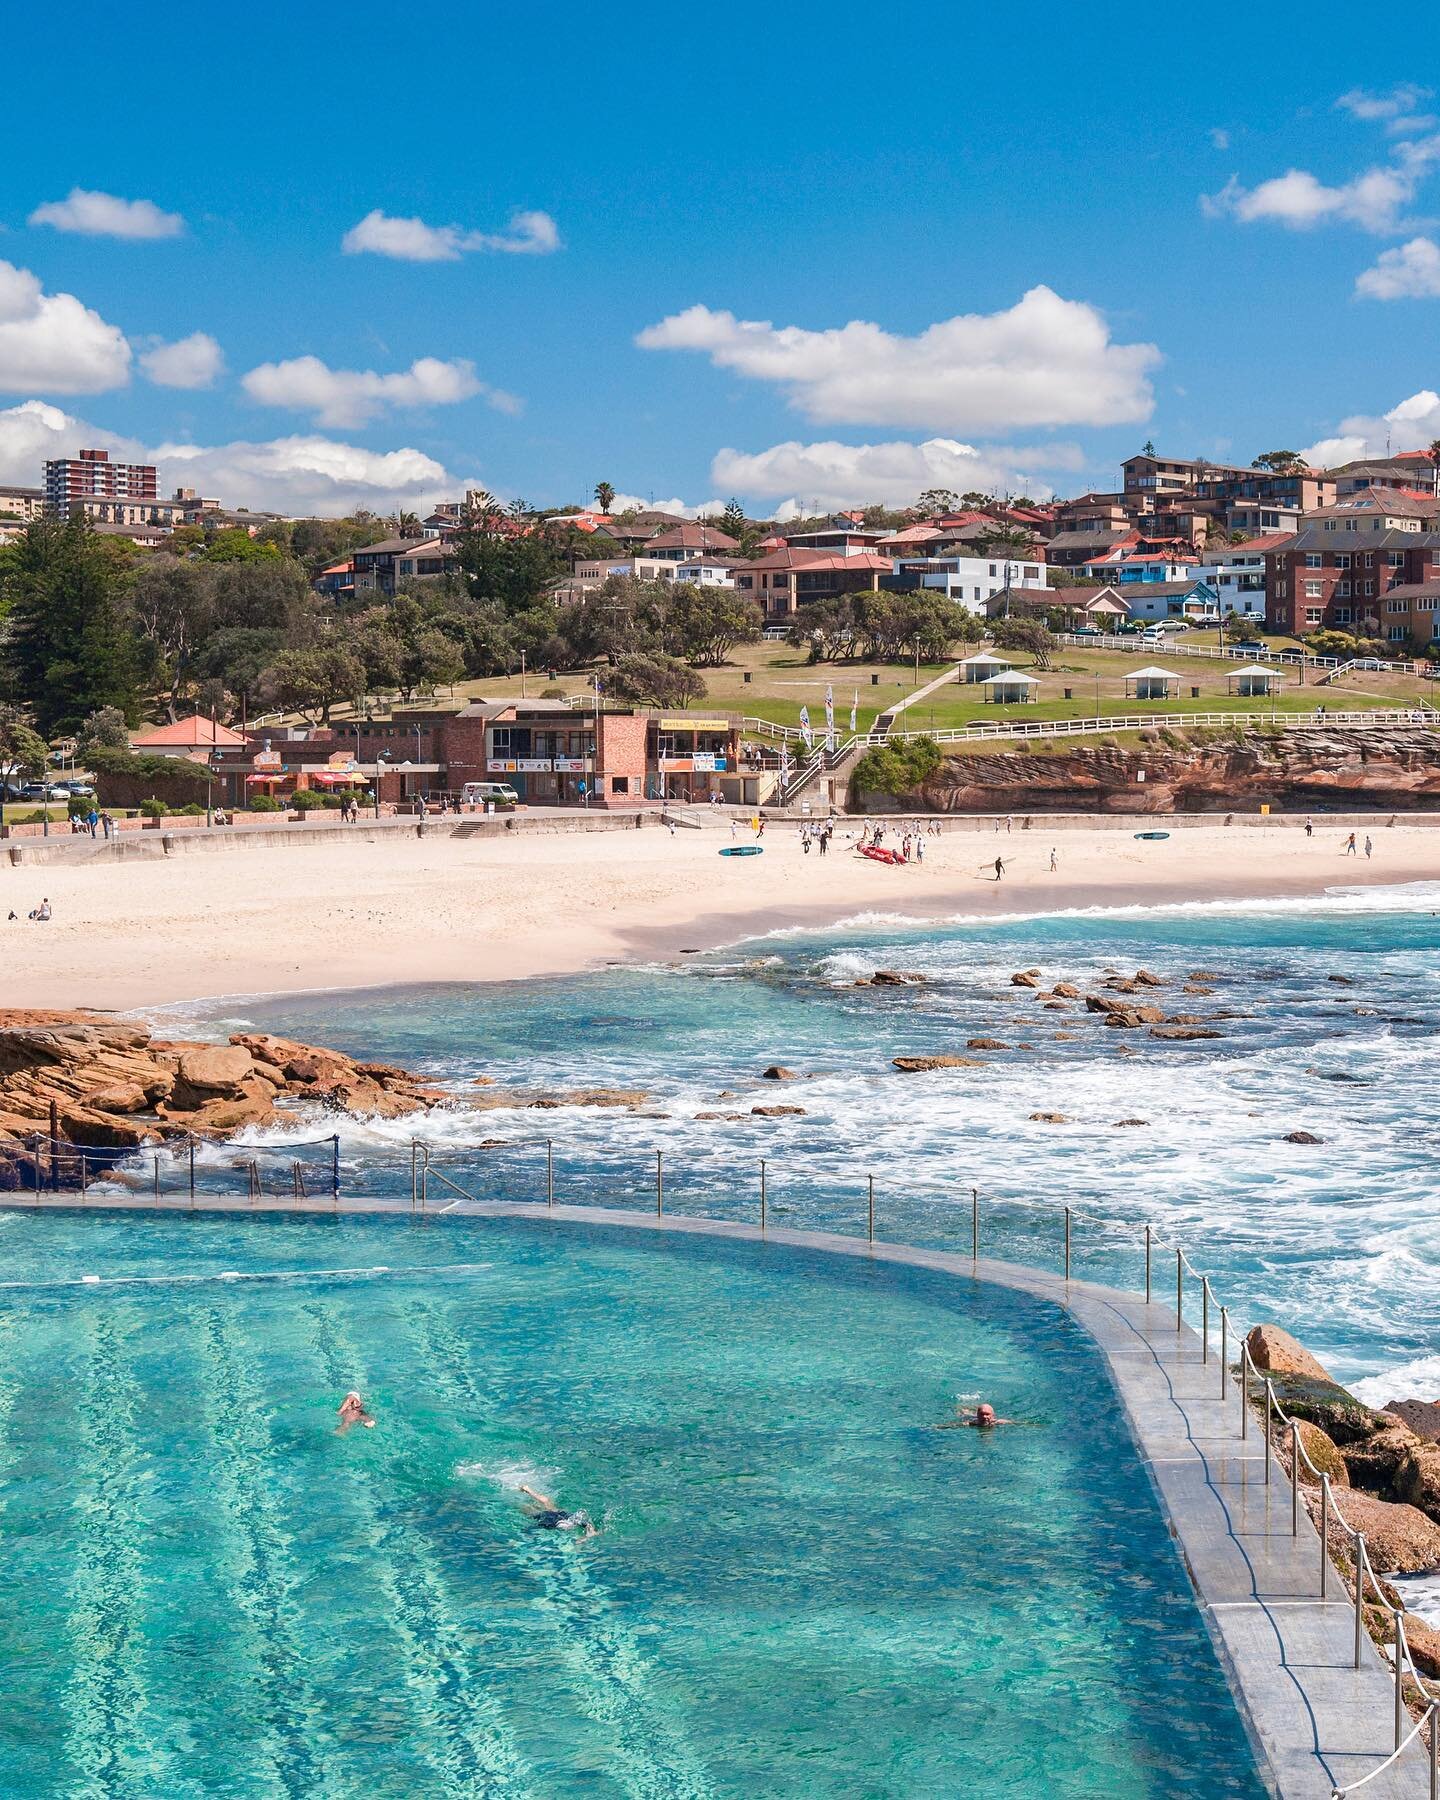 Small swimming paradise is located in the eastern suburbs of&nbsp;Sydney,&nbsp;Australia, 2&nbsp;kilometres south of&nbsp;Bondi Beach ✨ 🇦🇺 Bronte Rock pool is one of the most beautiful ocean pools in the world, offering stunning beach views and uni